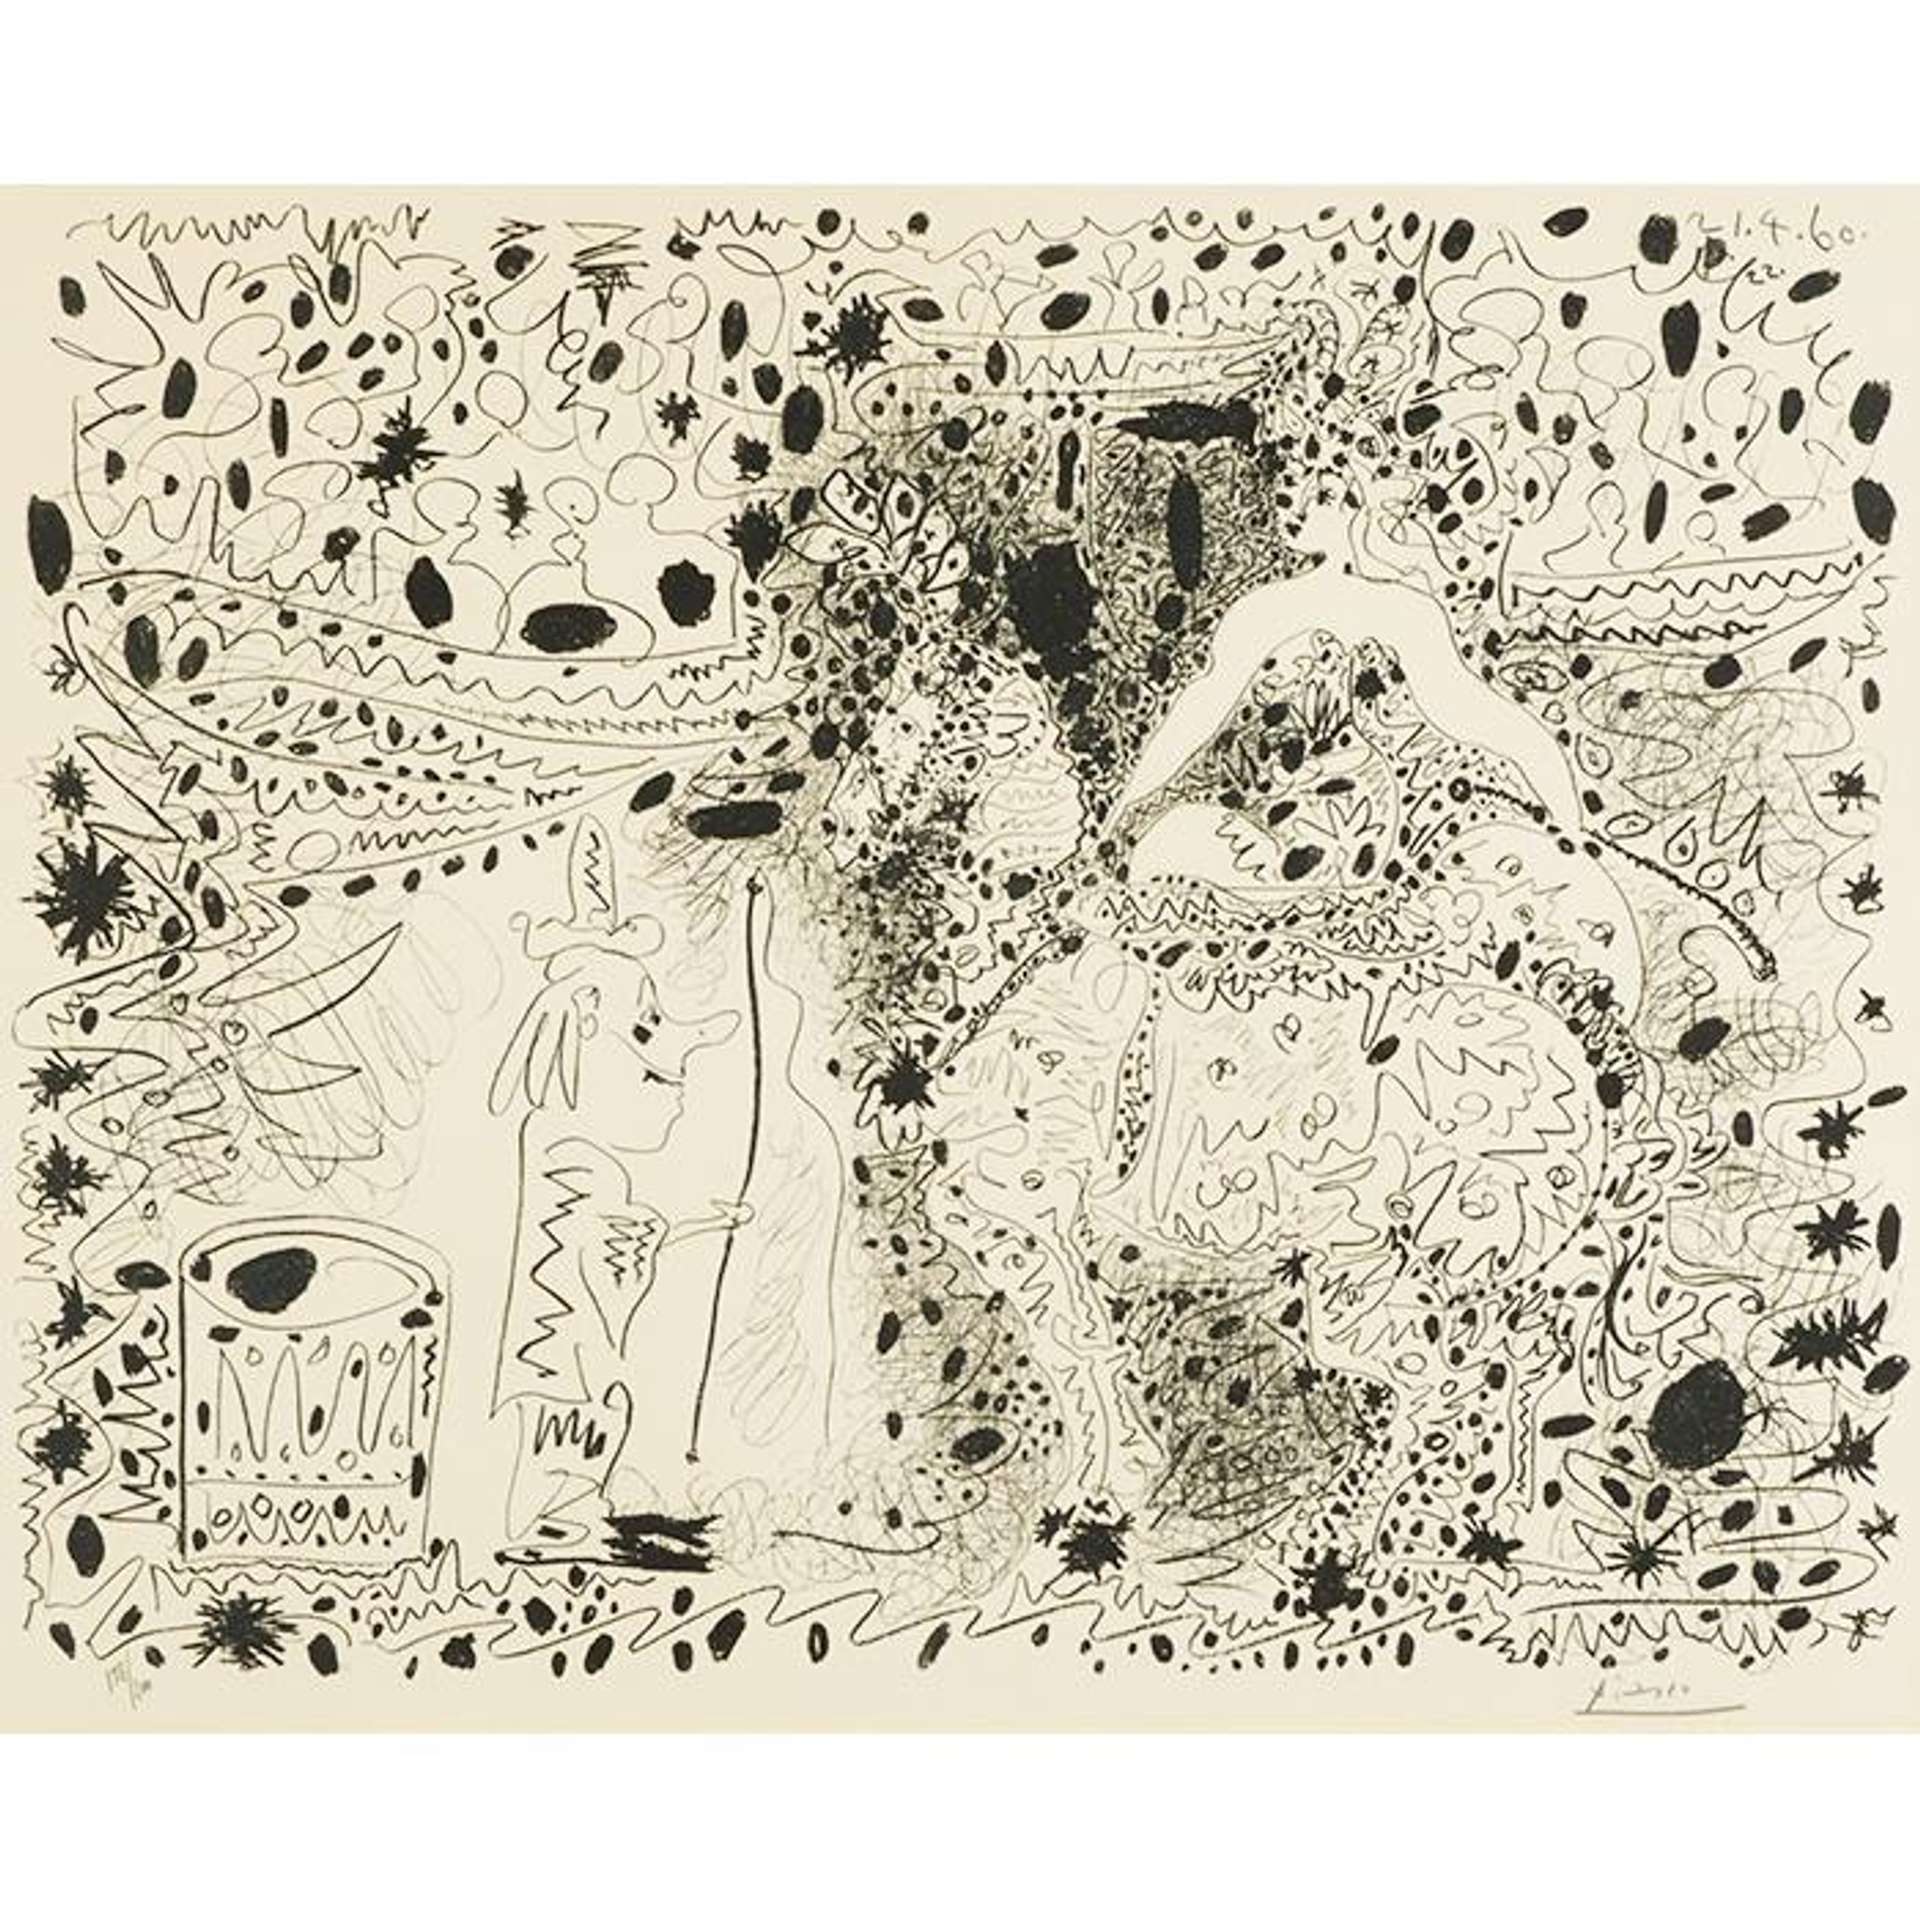 A monochrome line-drawing of a woman wearing a large dress, looking at a shorter male figure. All around the figures are dots, patterns and lines creating a sense of chaos.